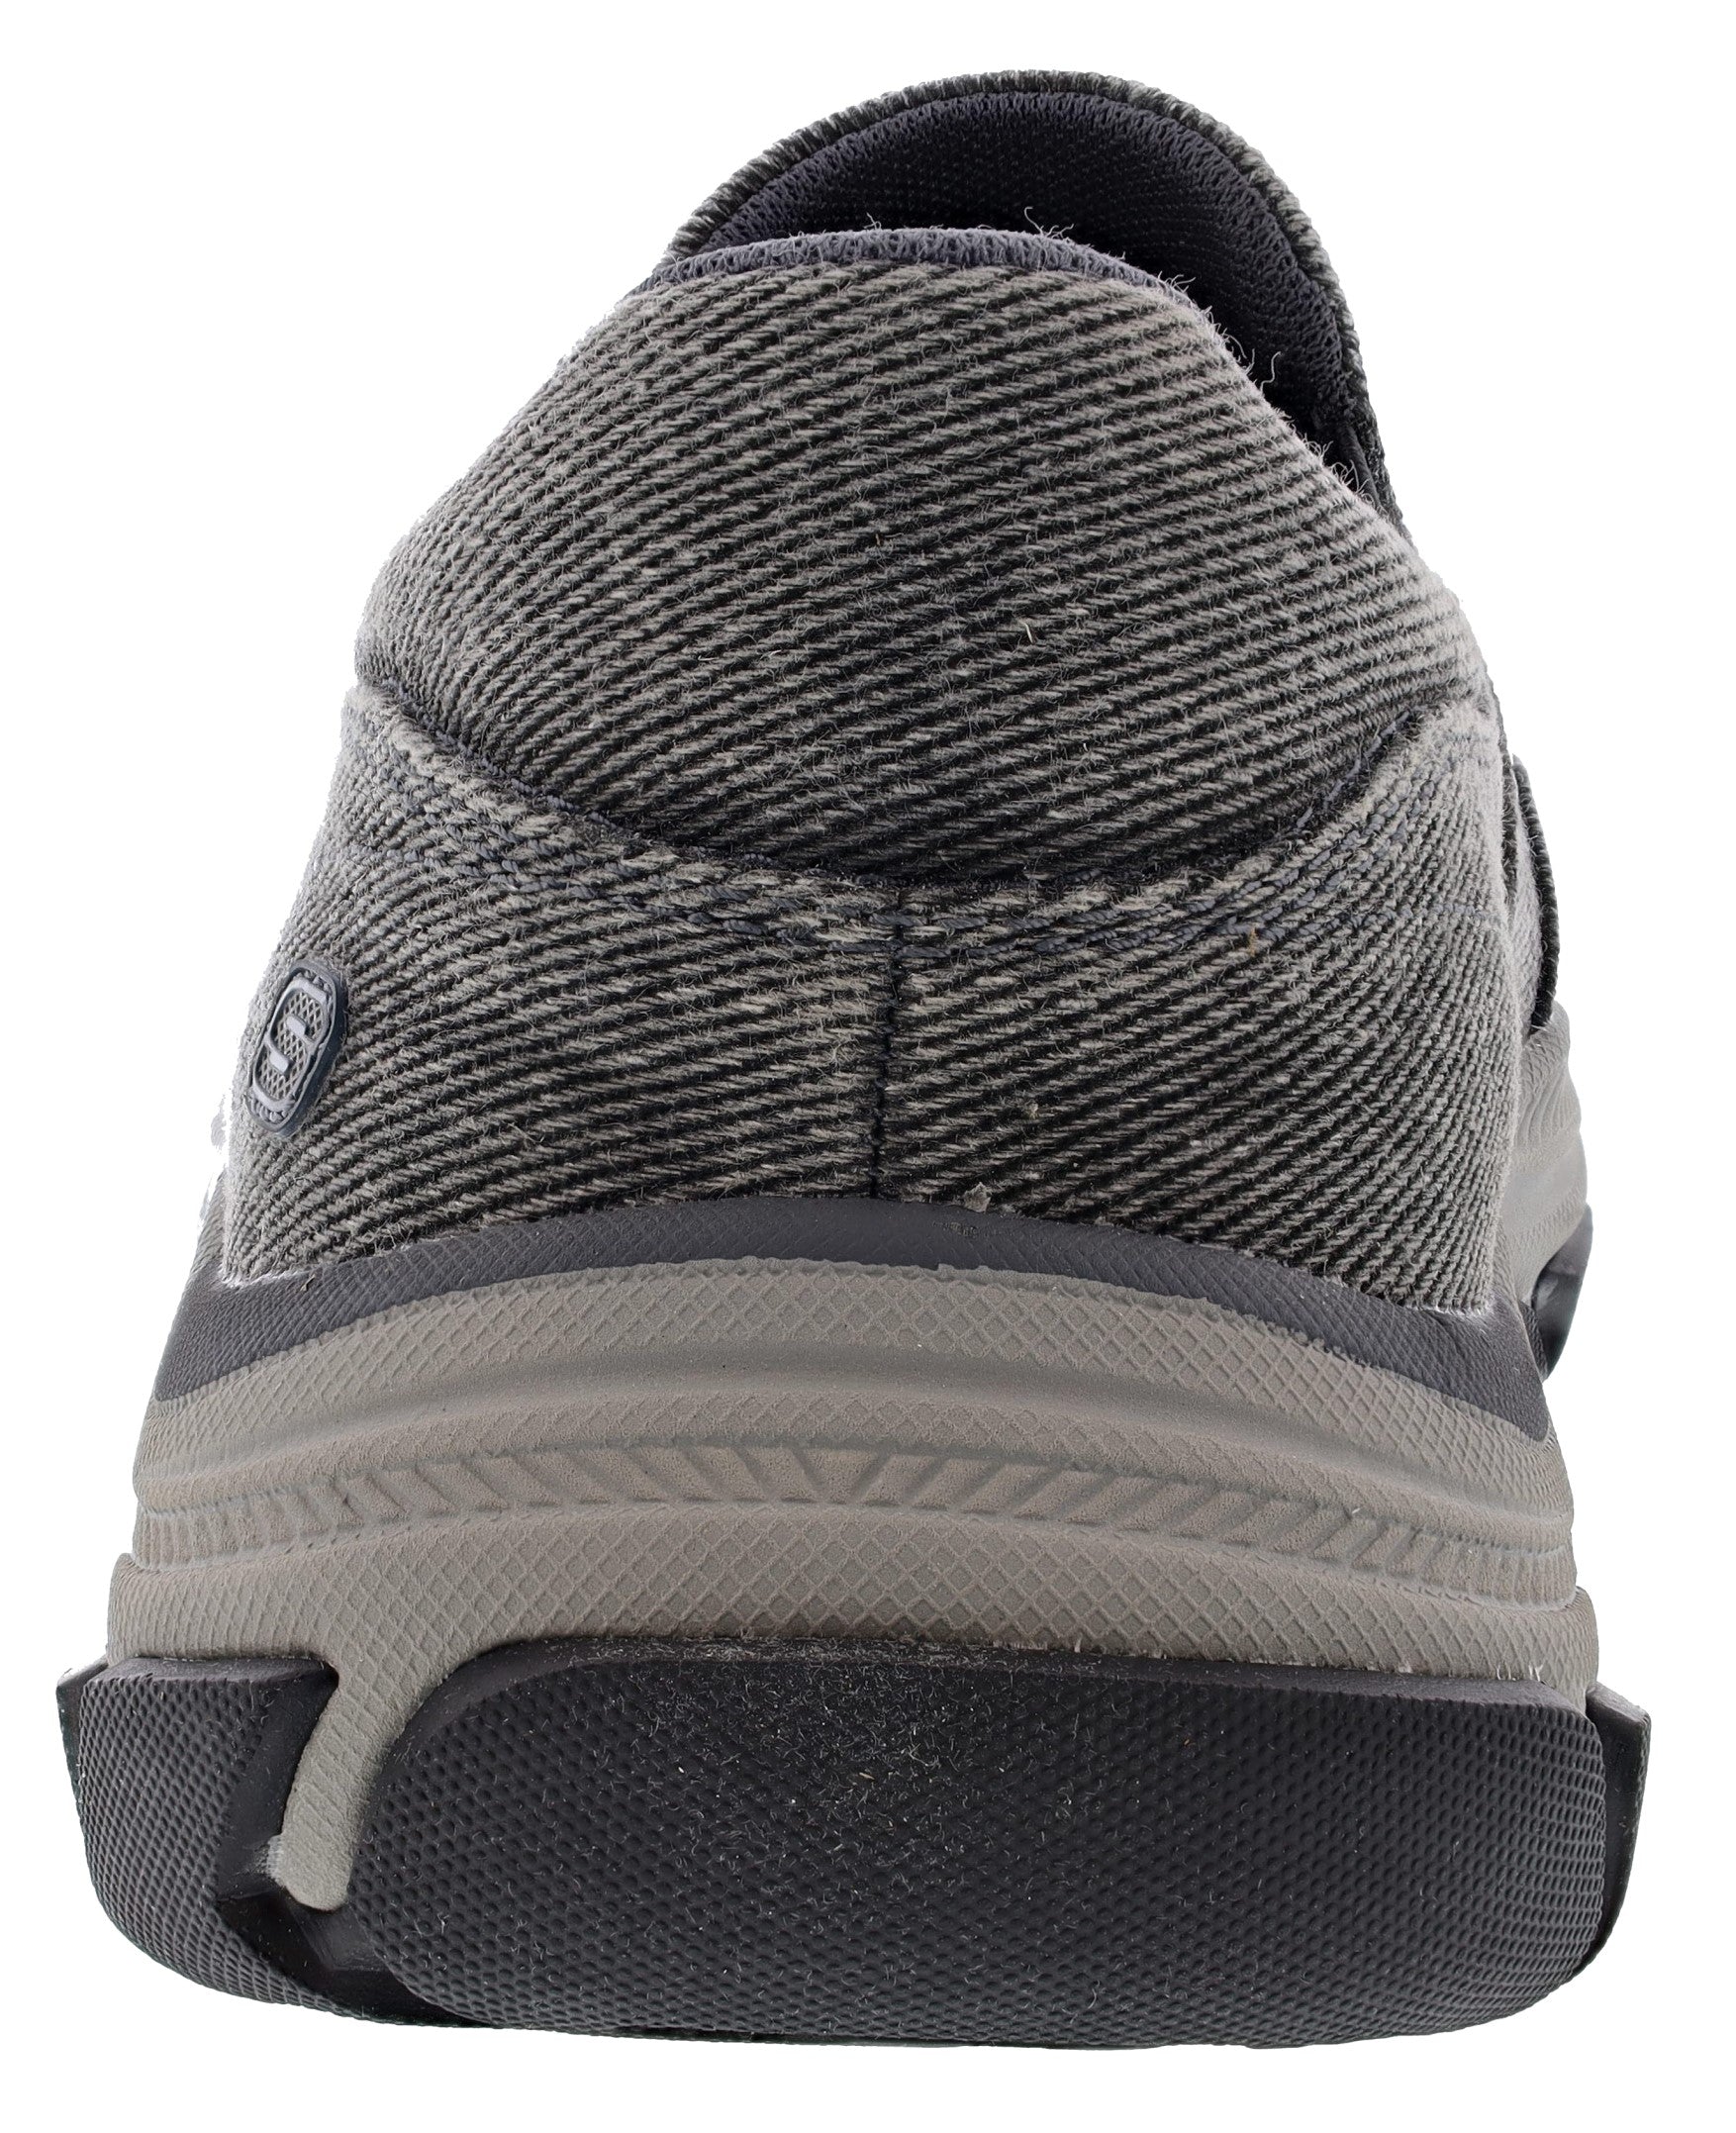 Relaxed Fit Respected Fallston Vintage Washed Walking Shoes | Shoe City